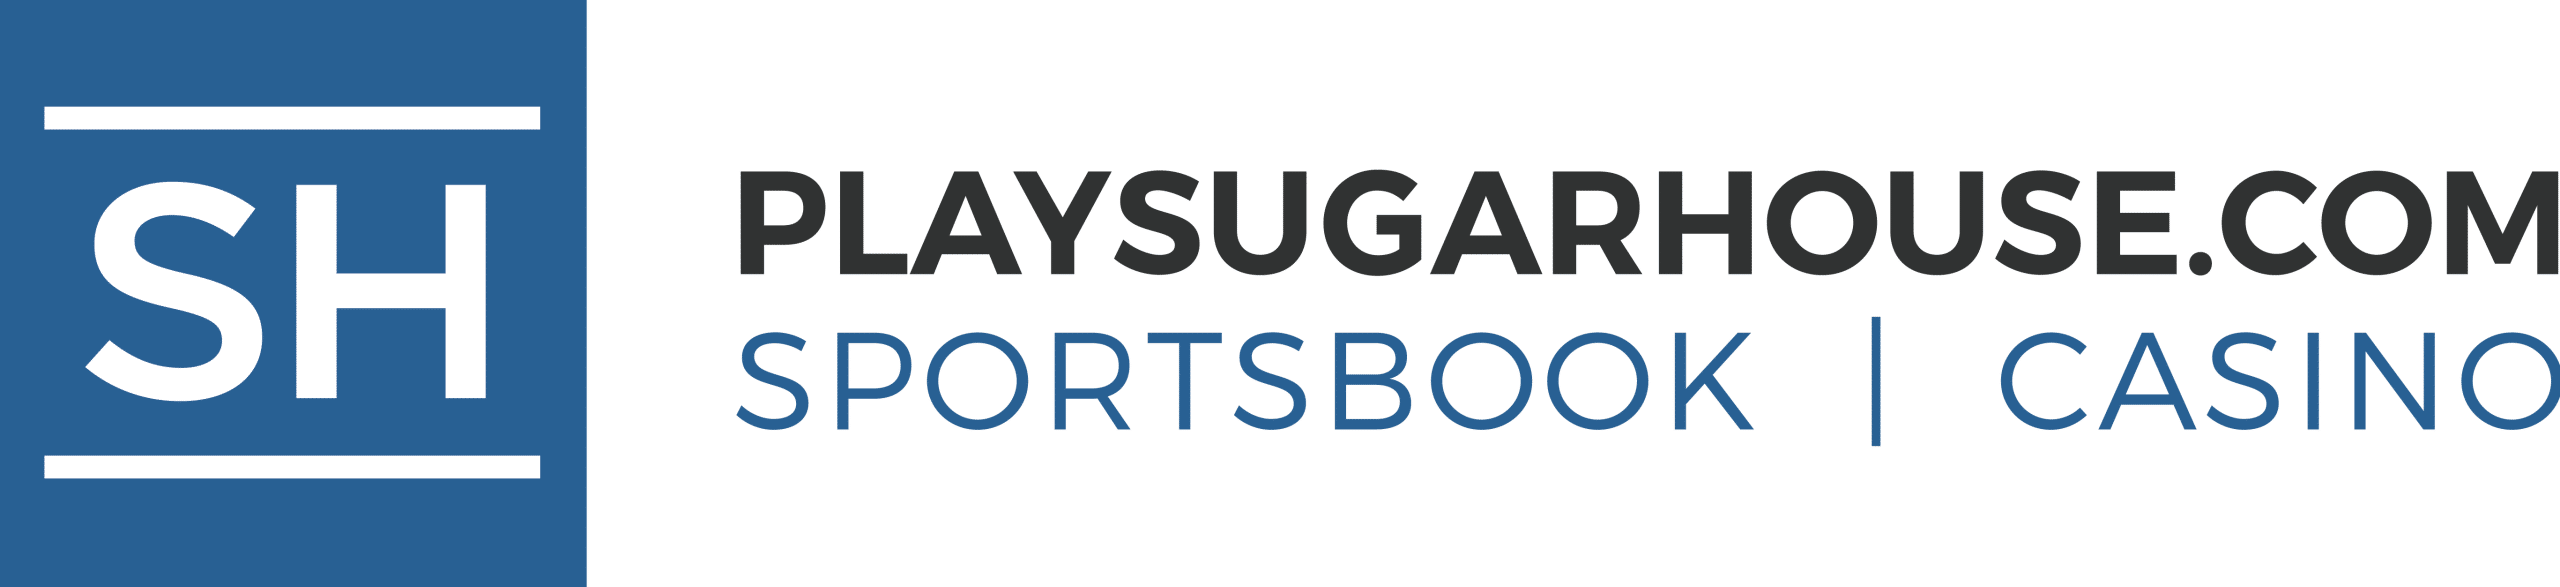 Sugar House Sportsbook Review